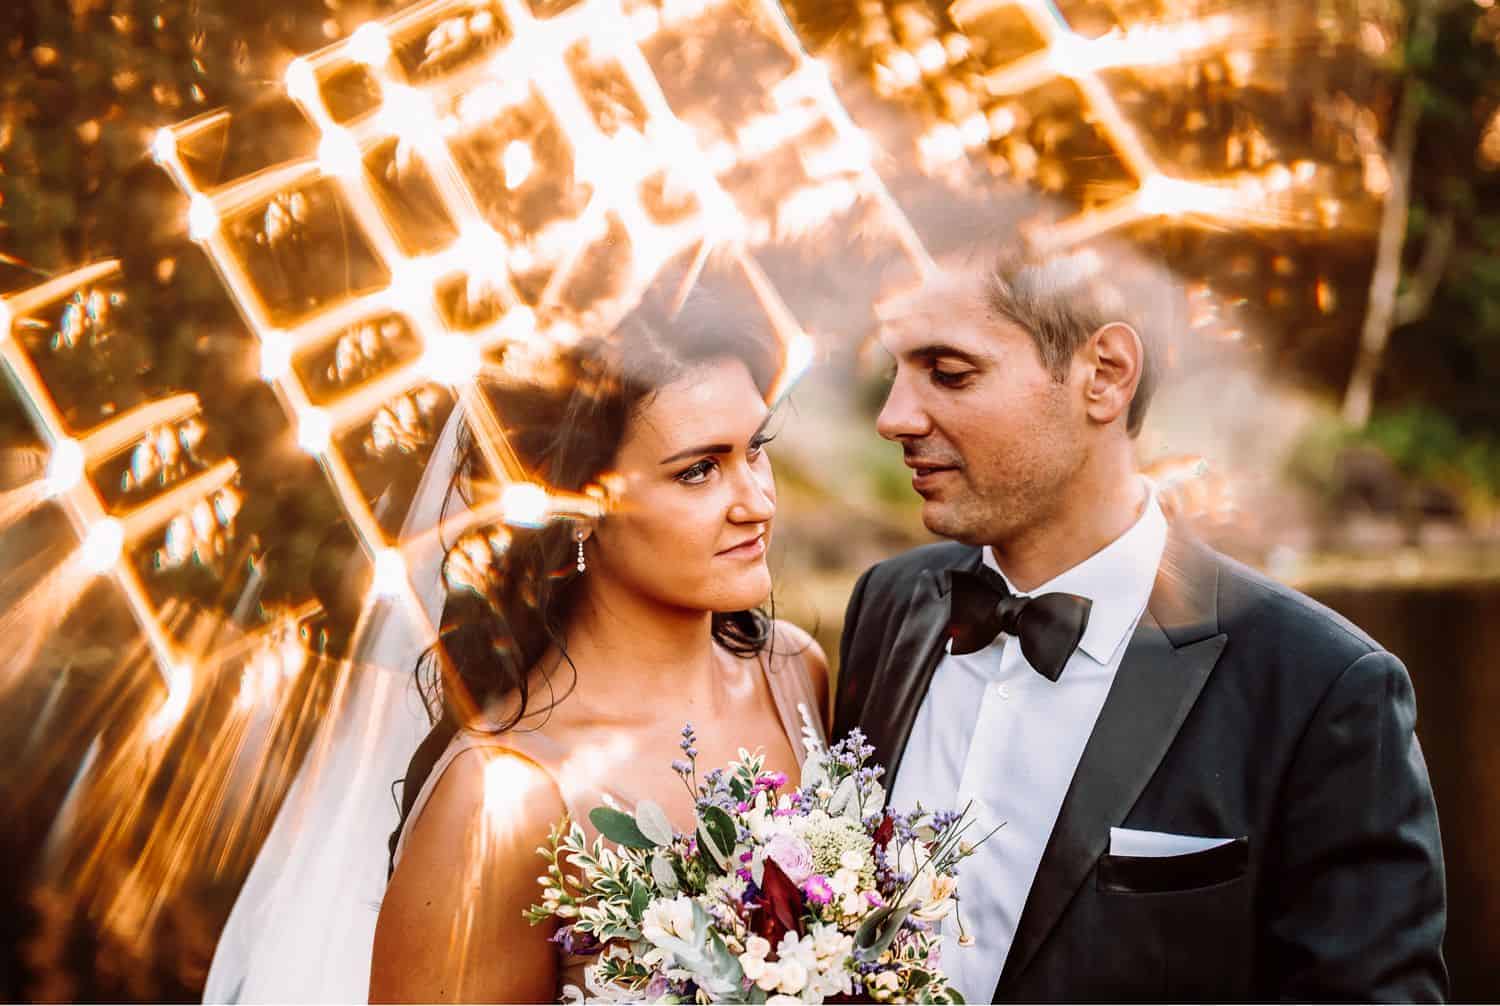 Bride holding bouquet looks at groom with flares of golden light spilling around them.